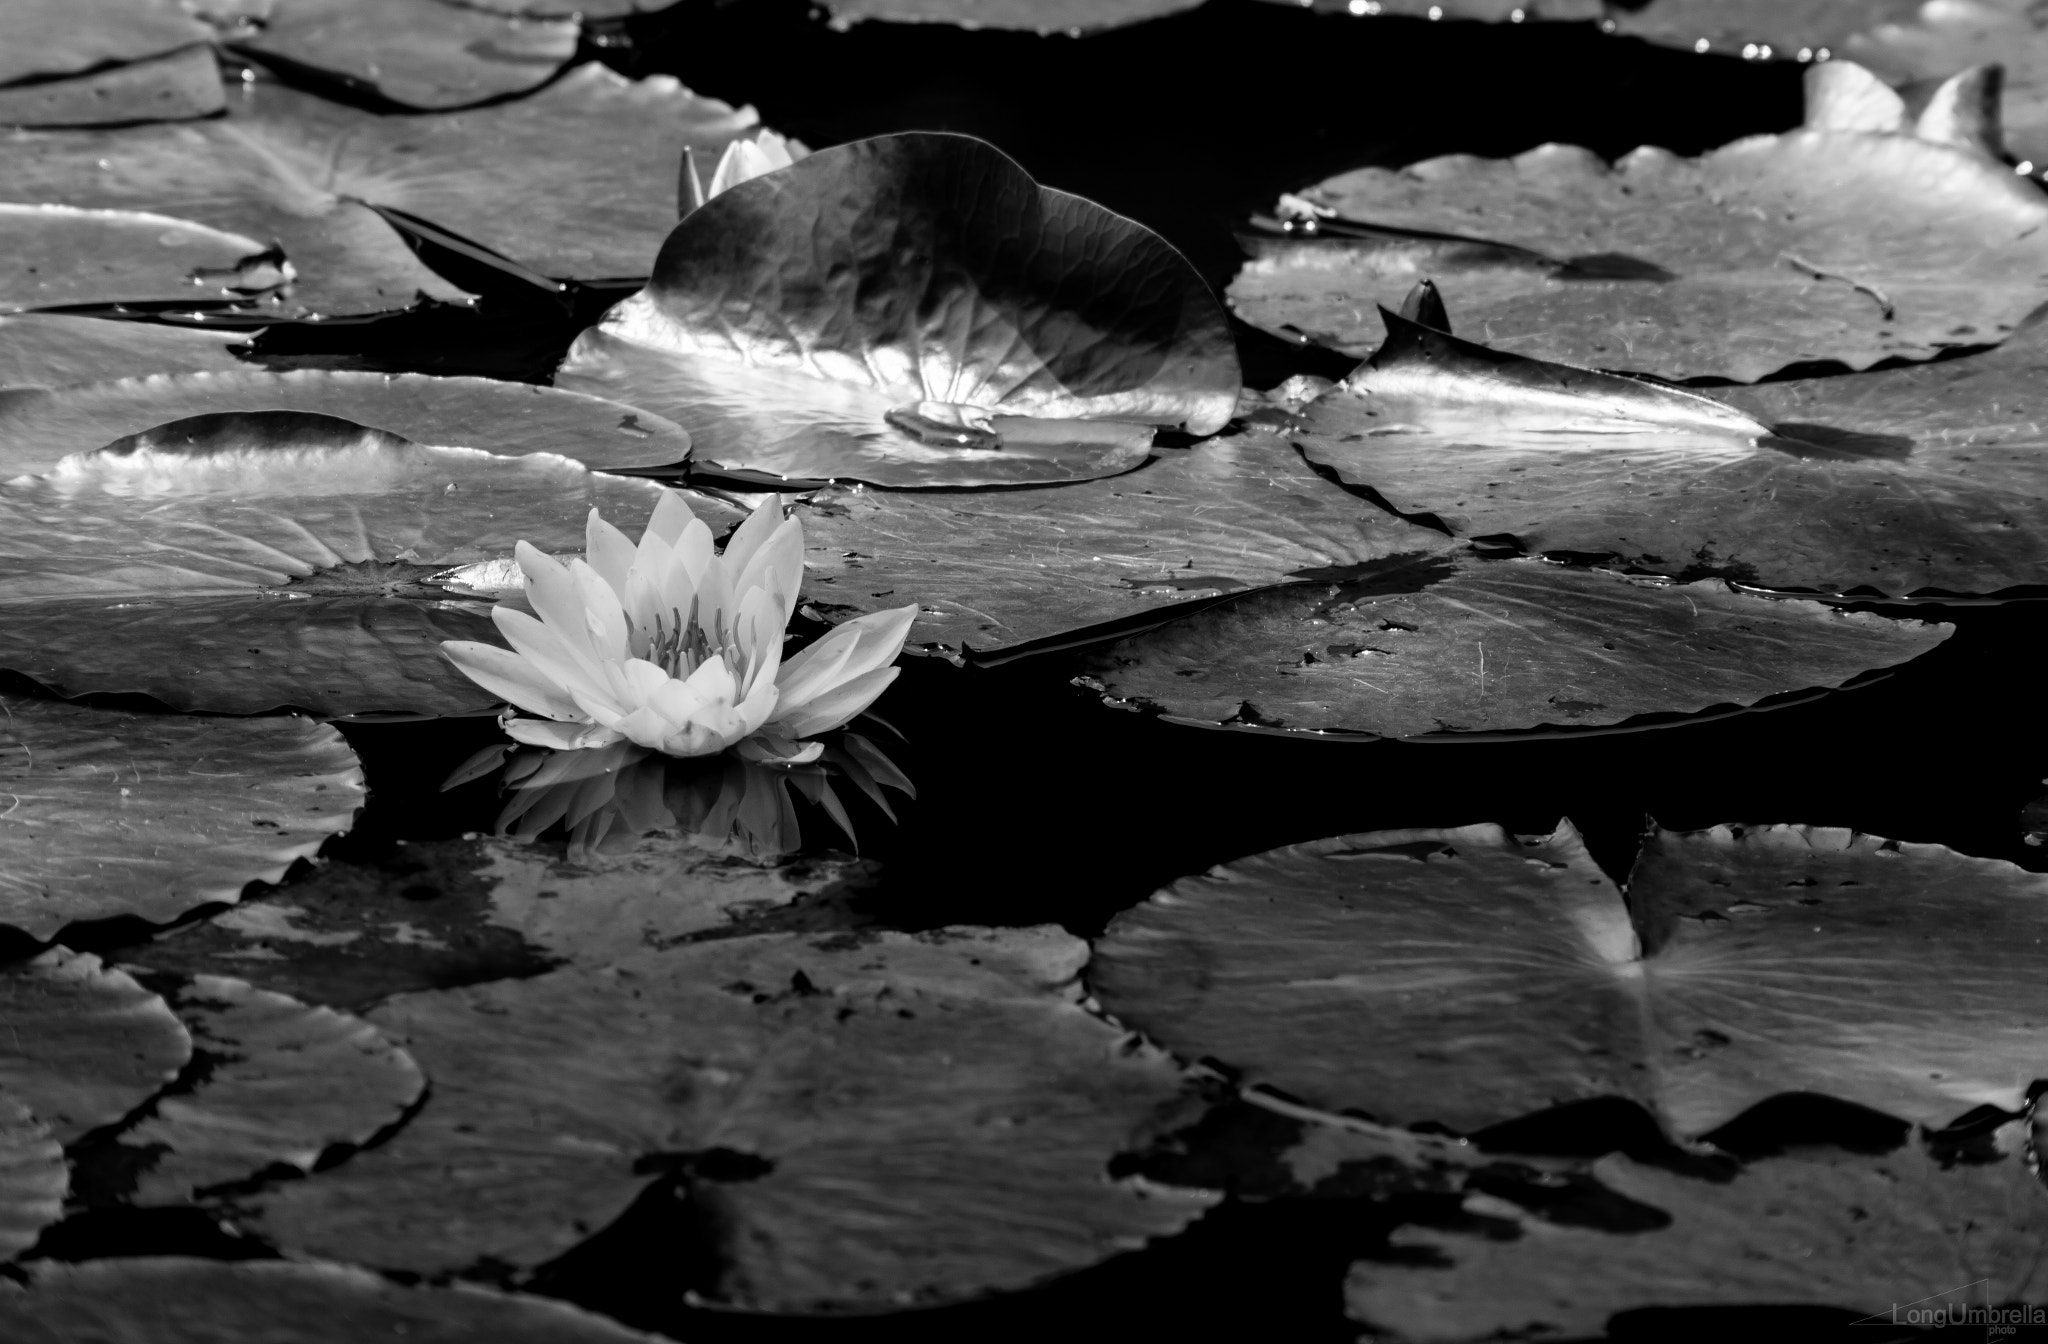 Tele-Elmar 1:4/135 sample photo. Water lily photography